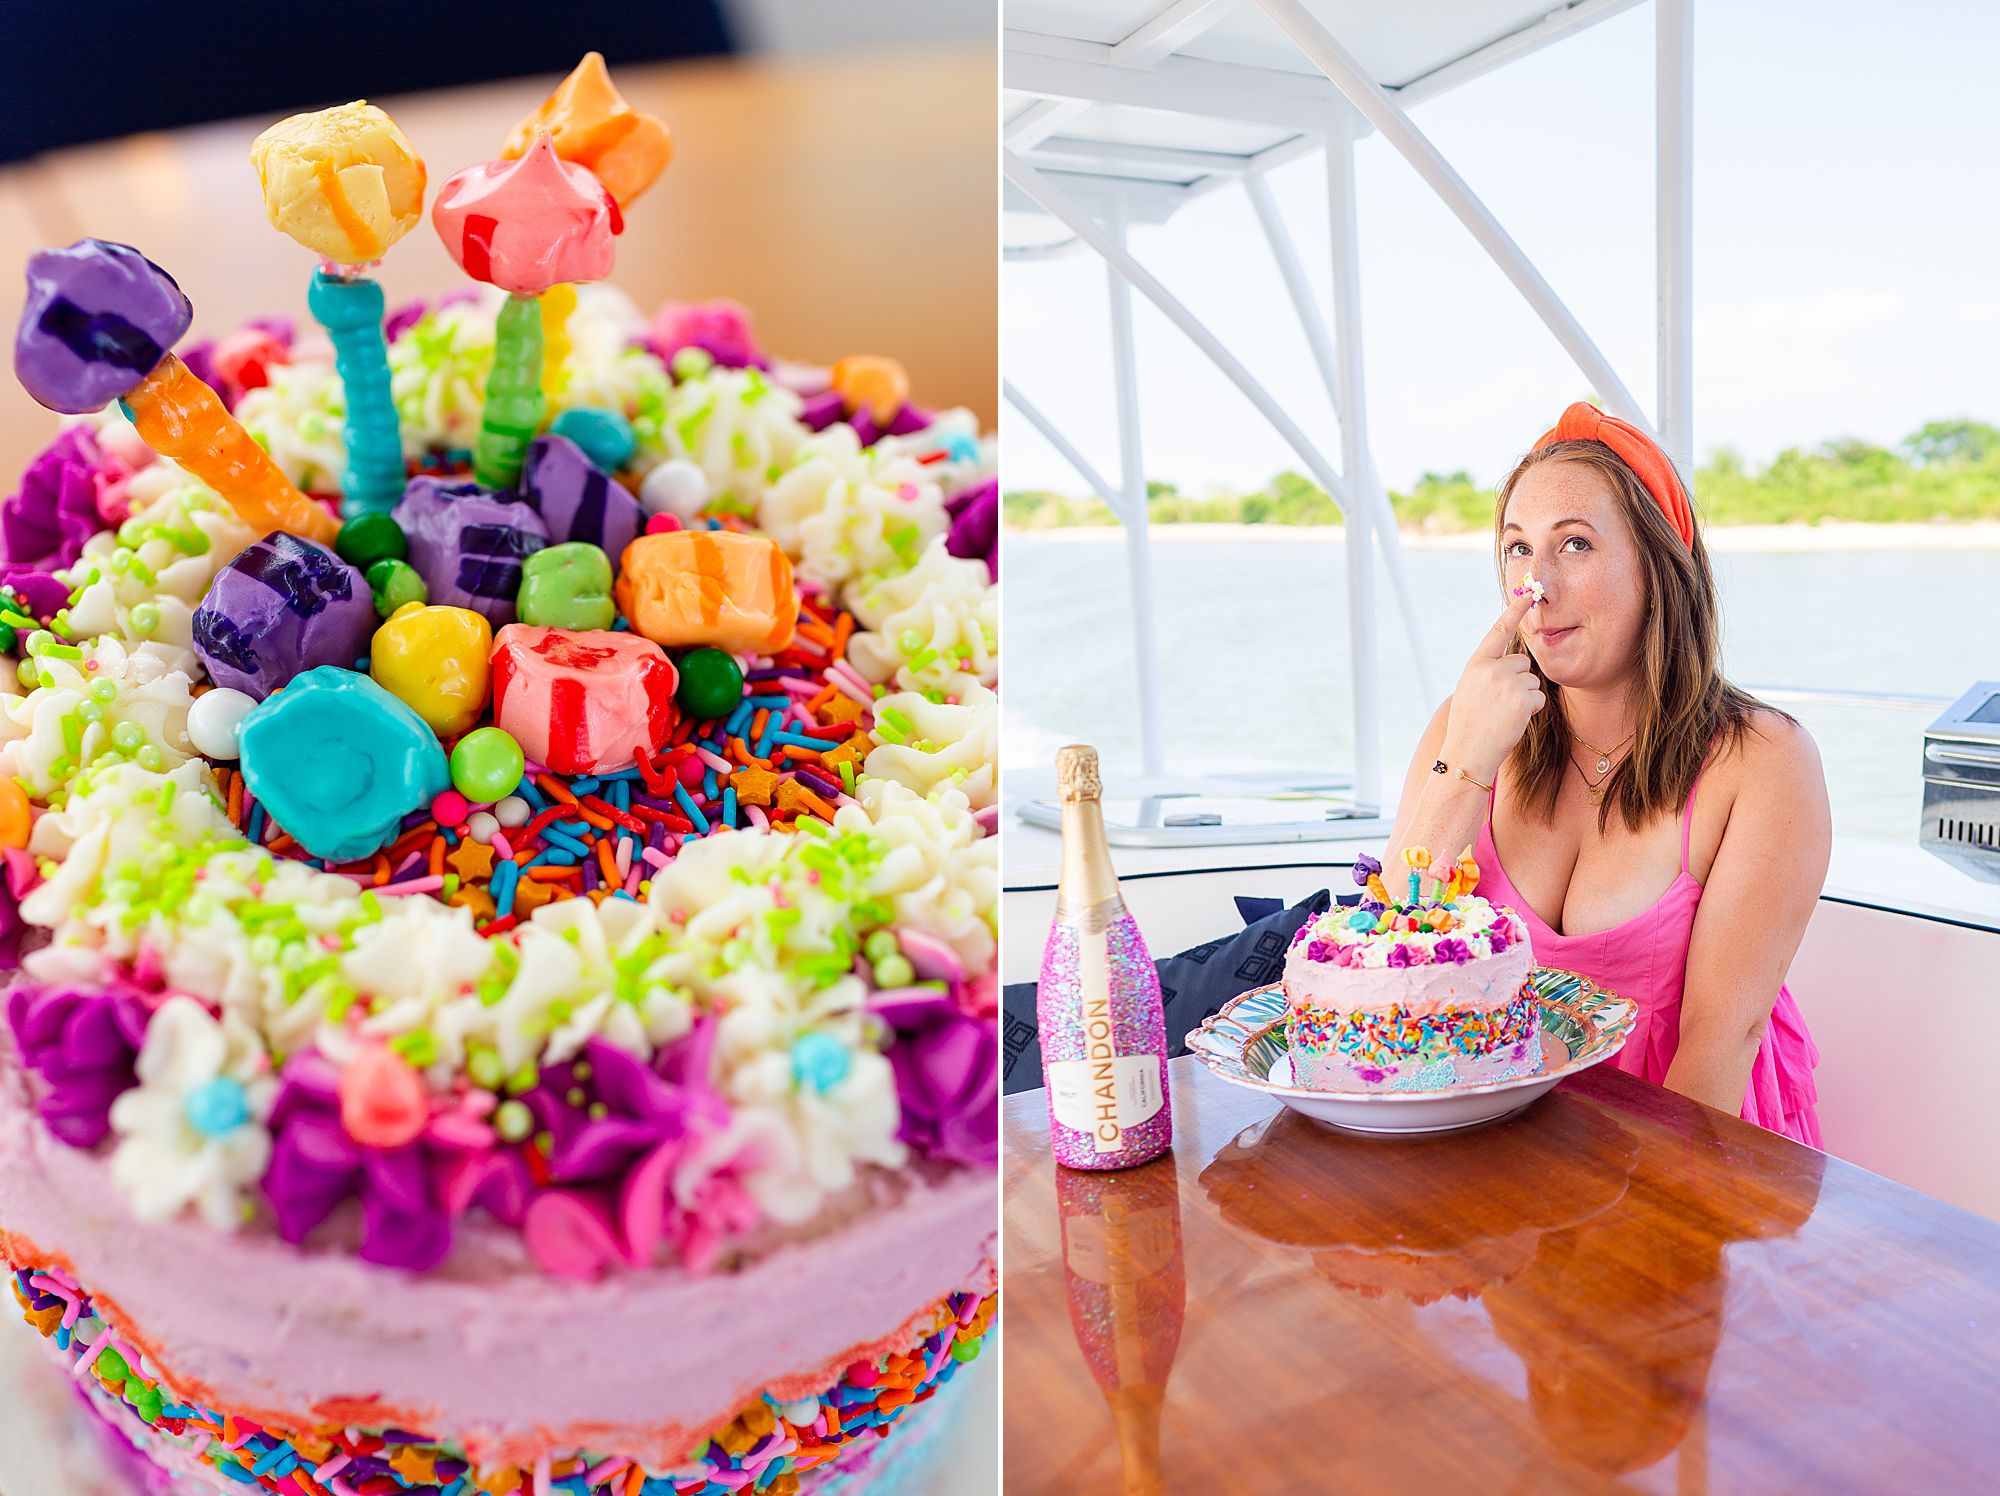 Lisa Frank inspired birthday cake topped with saltwater taffy. Galveston yacht birthday party.